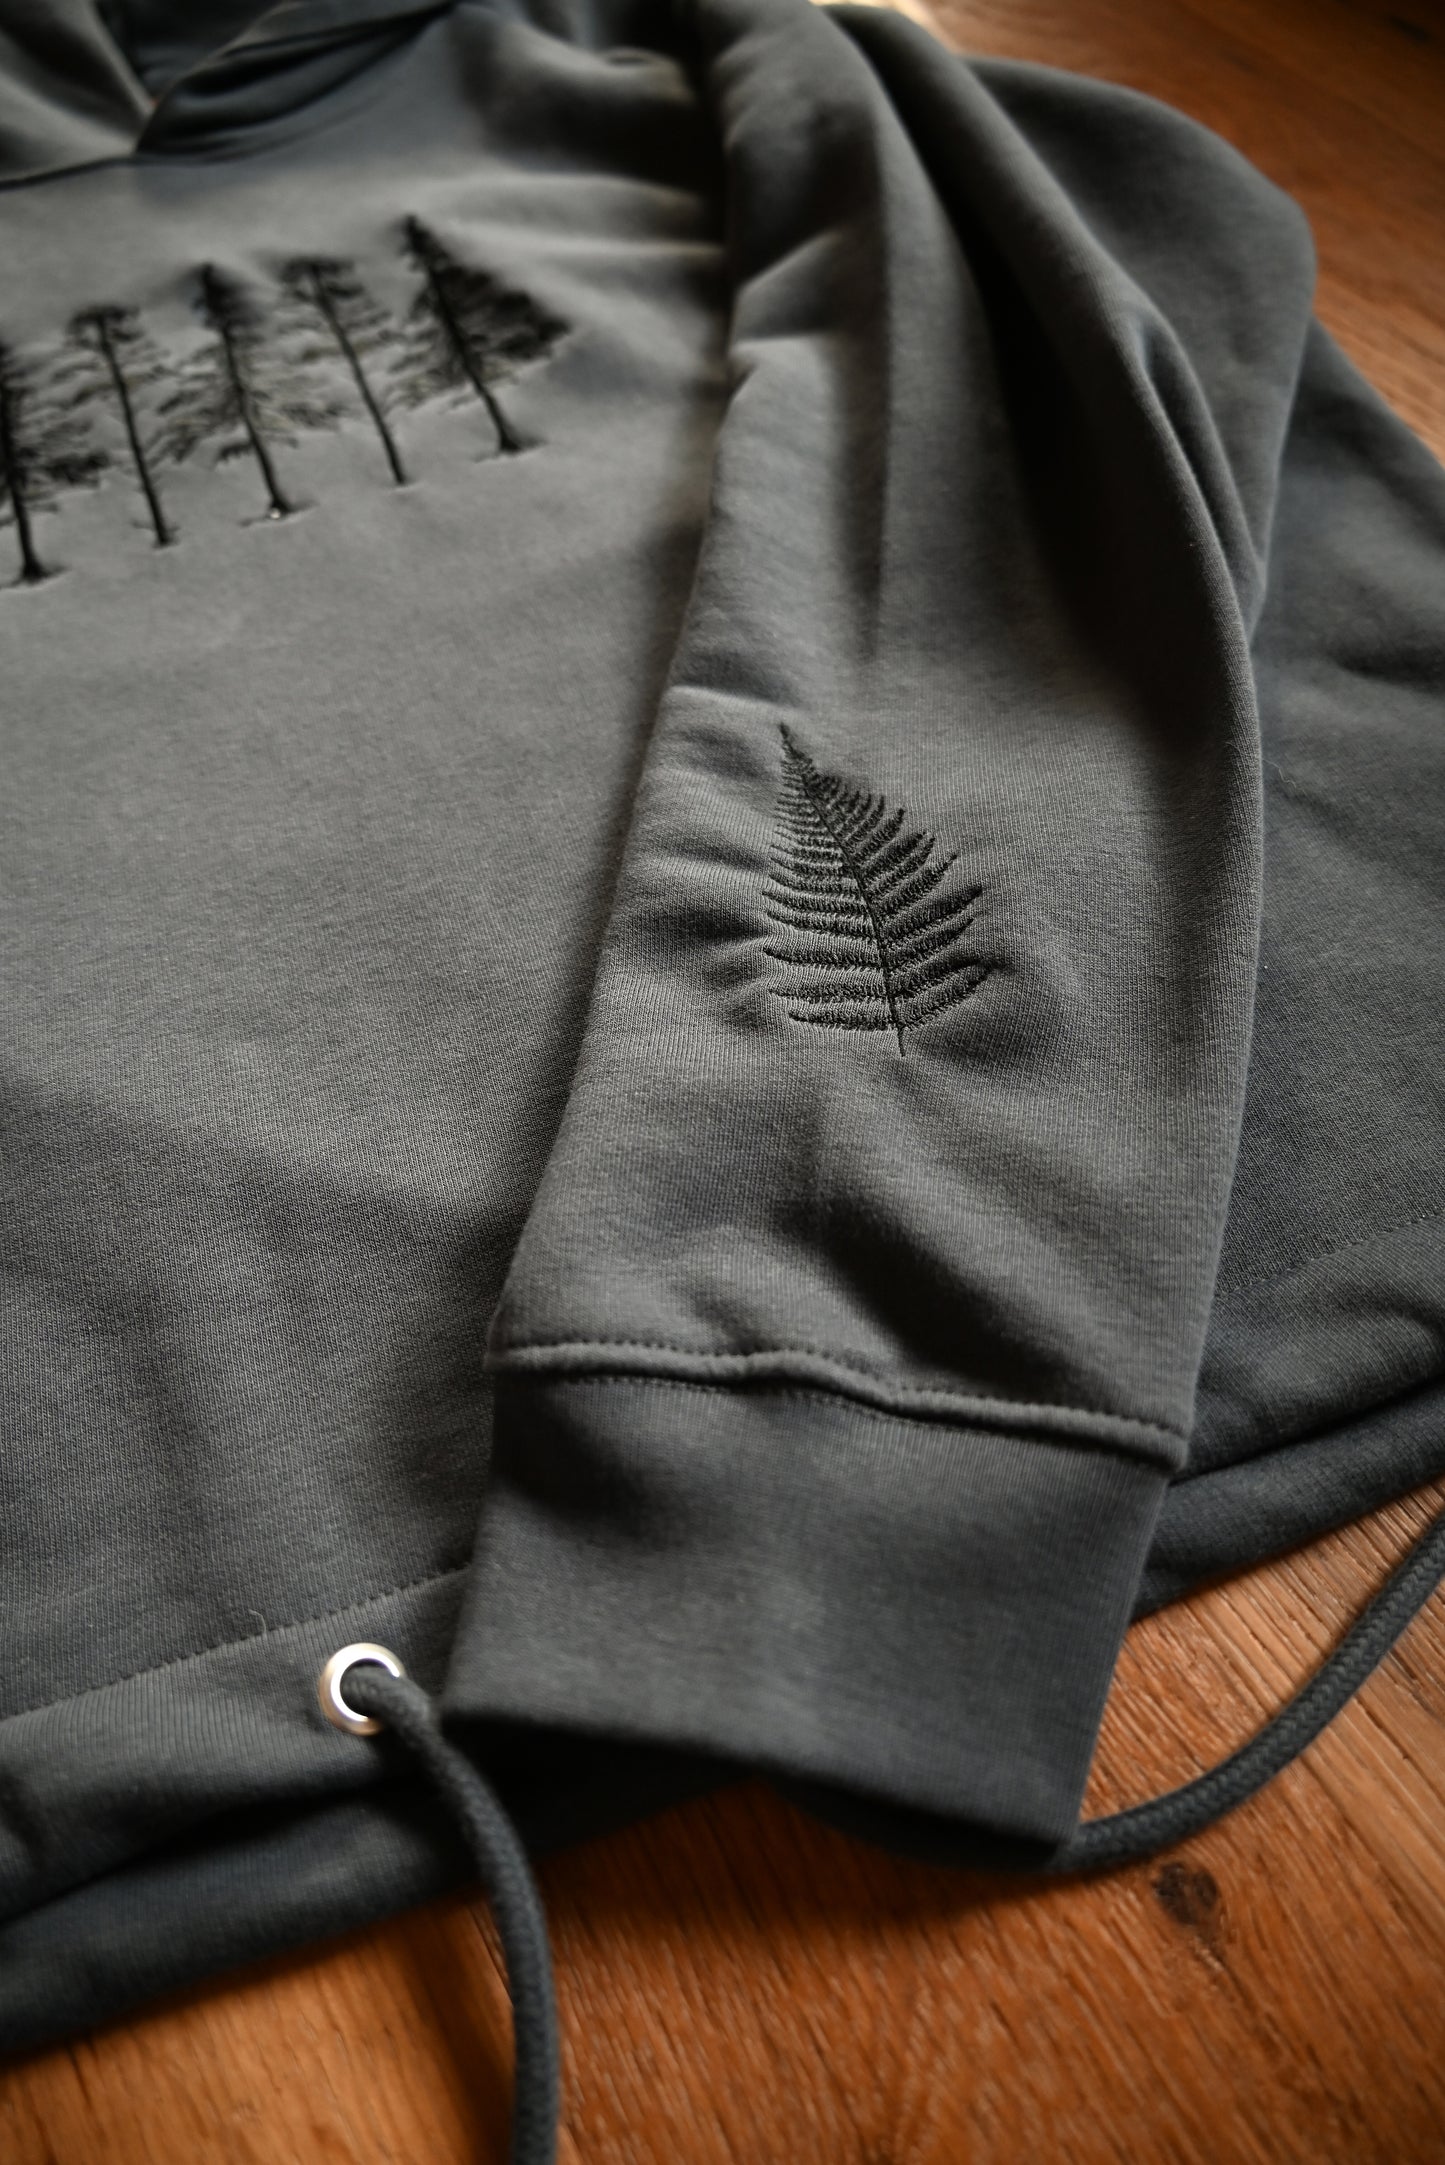 Tree's & Fern Embroidered Women's Cropped & Unisex Hoodie